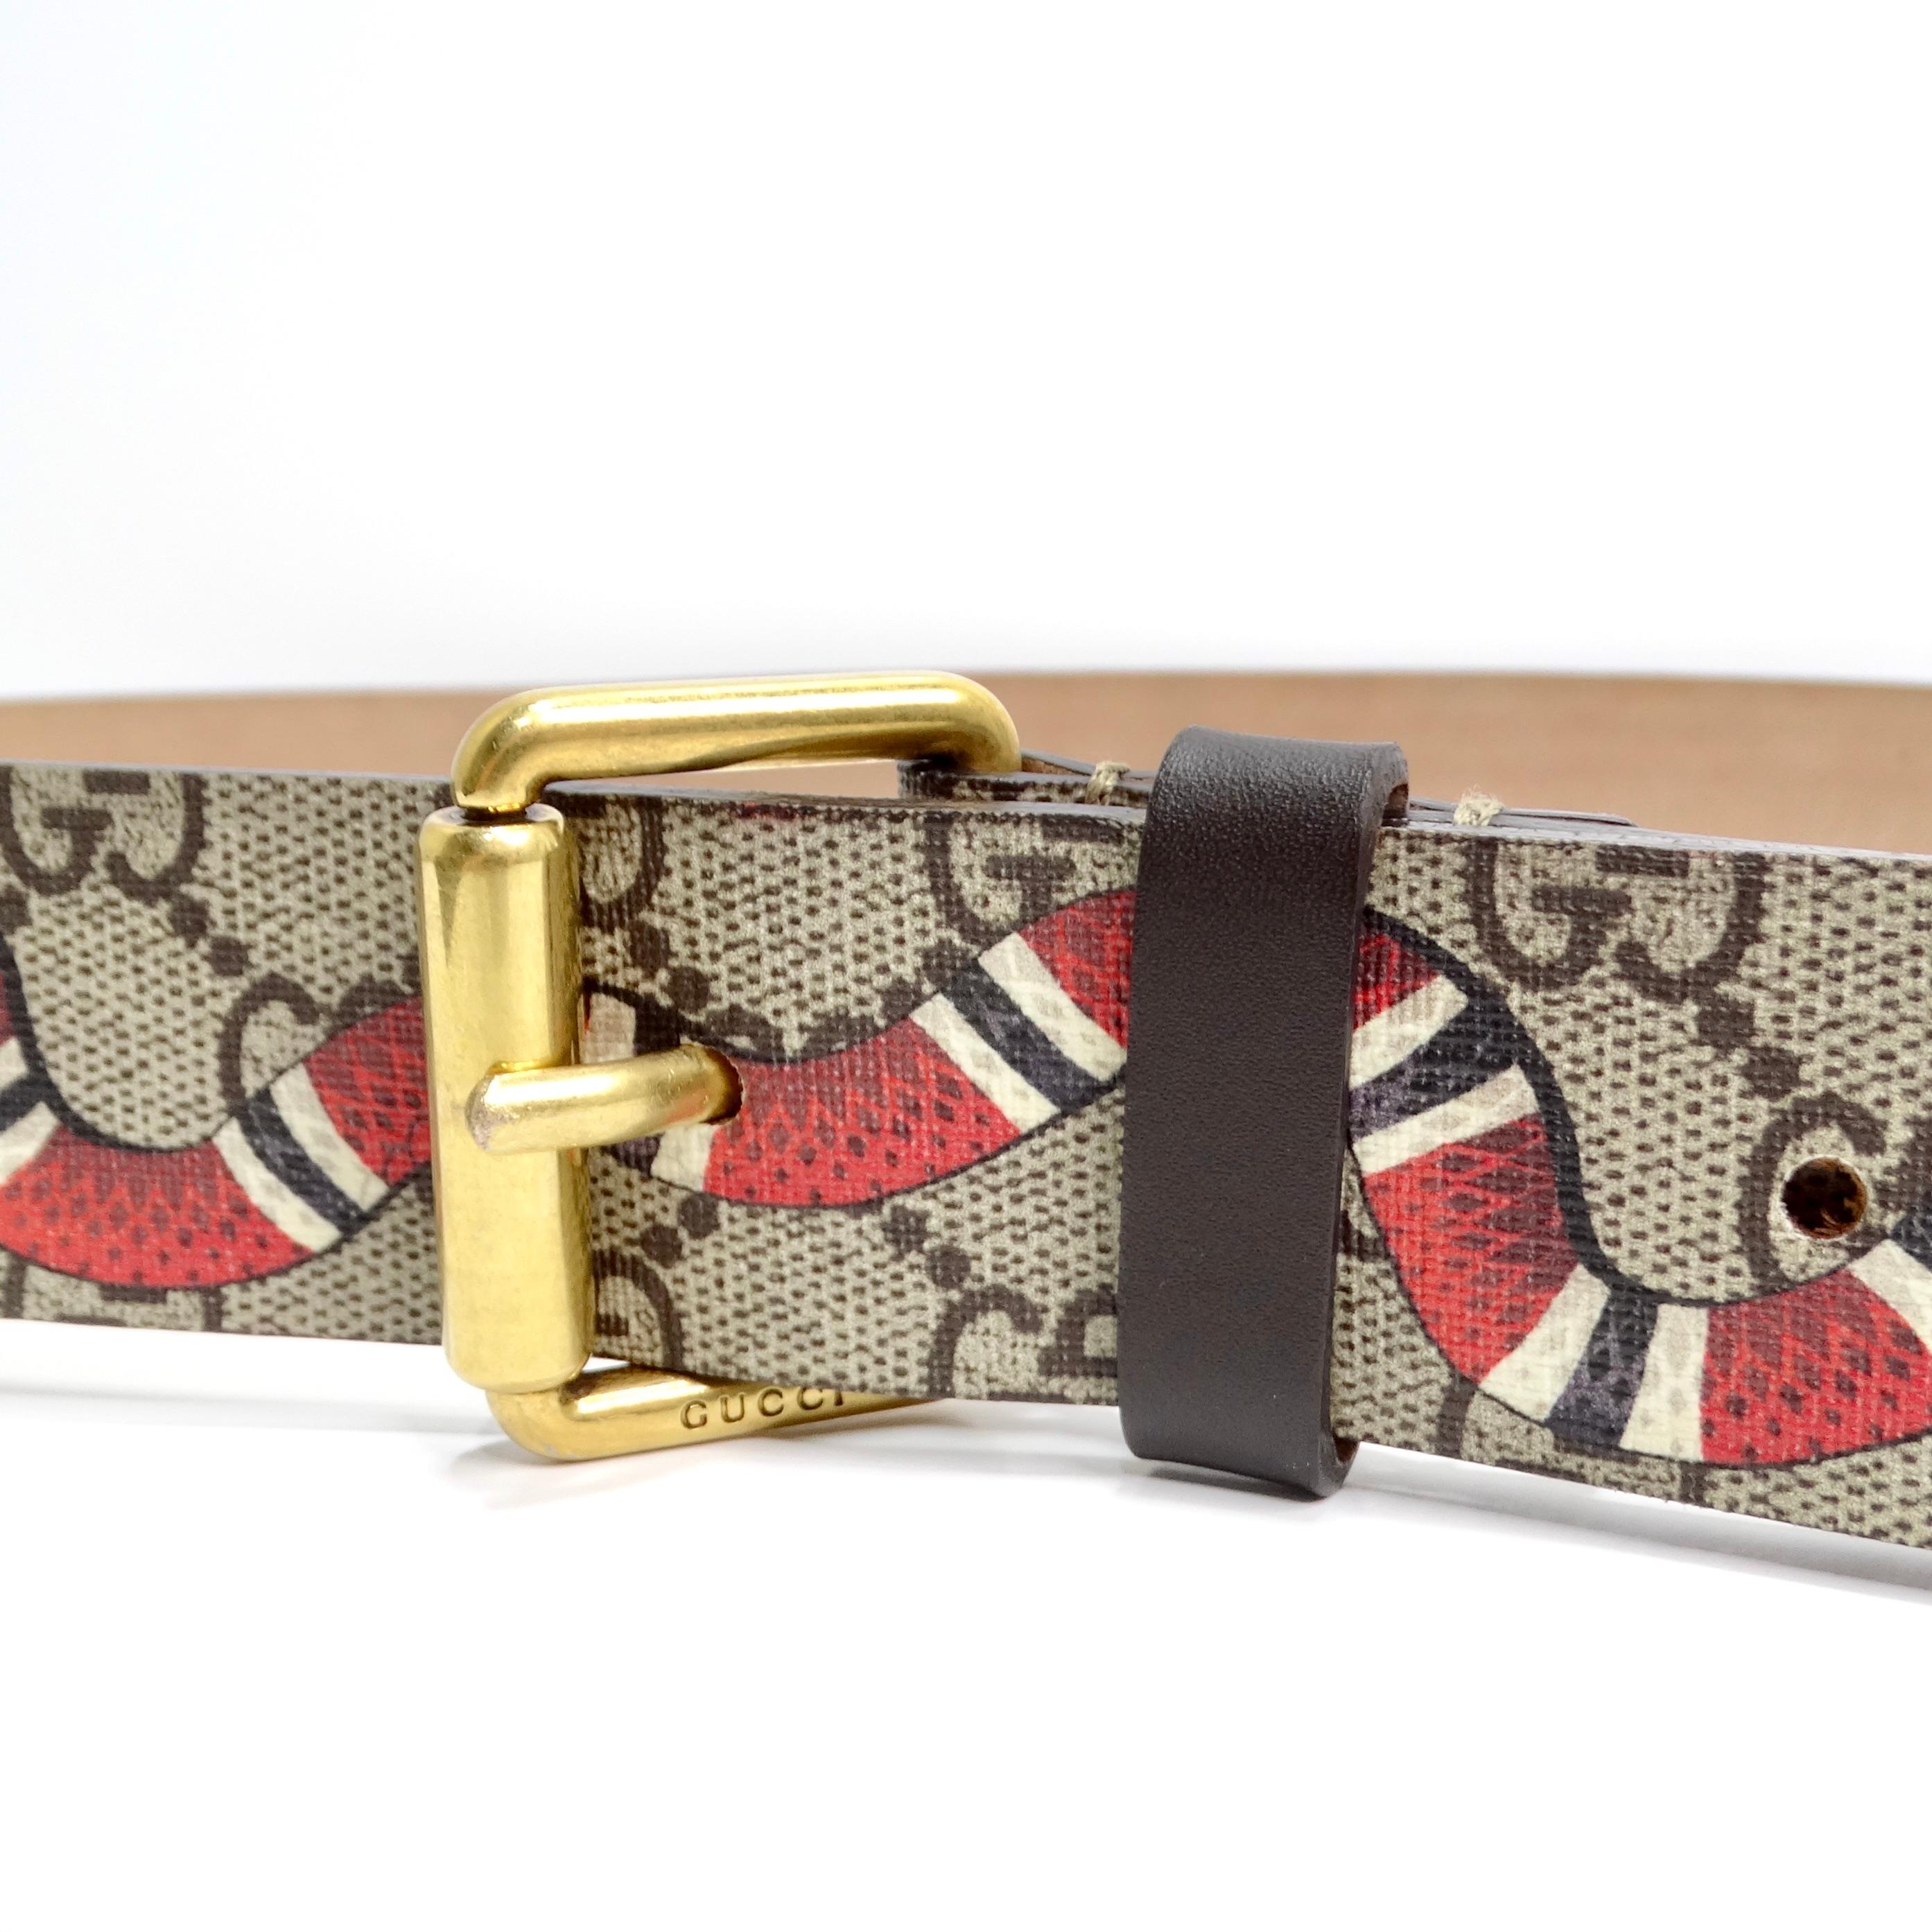 Introducing the Gucci Men's Monogram Snake Belt, a bold and stylish accessory that effortlessly blends classic design with contemporary flair. This belt features the iconic Gucci monogram canvas, known for its timeless appeal and sophistication,